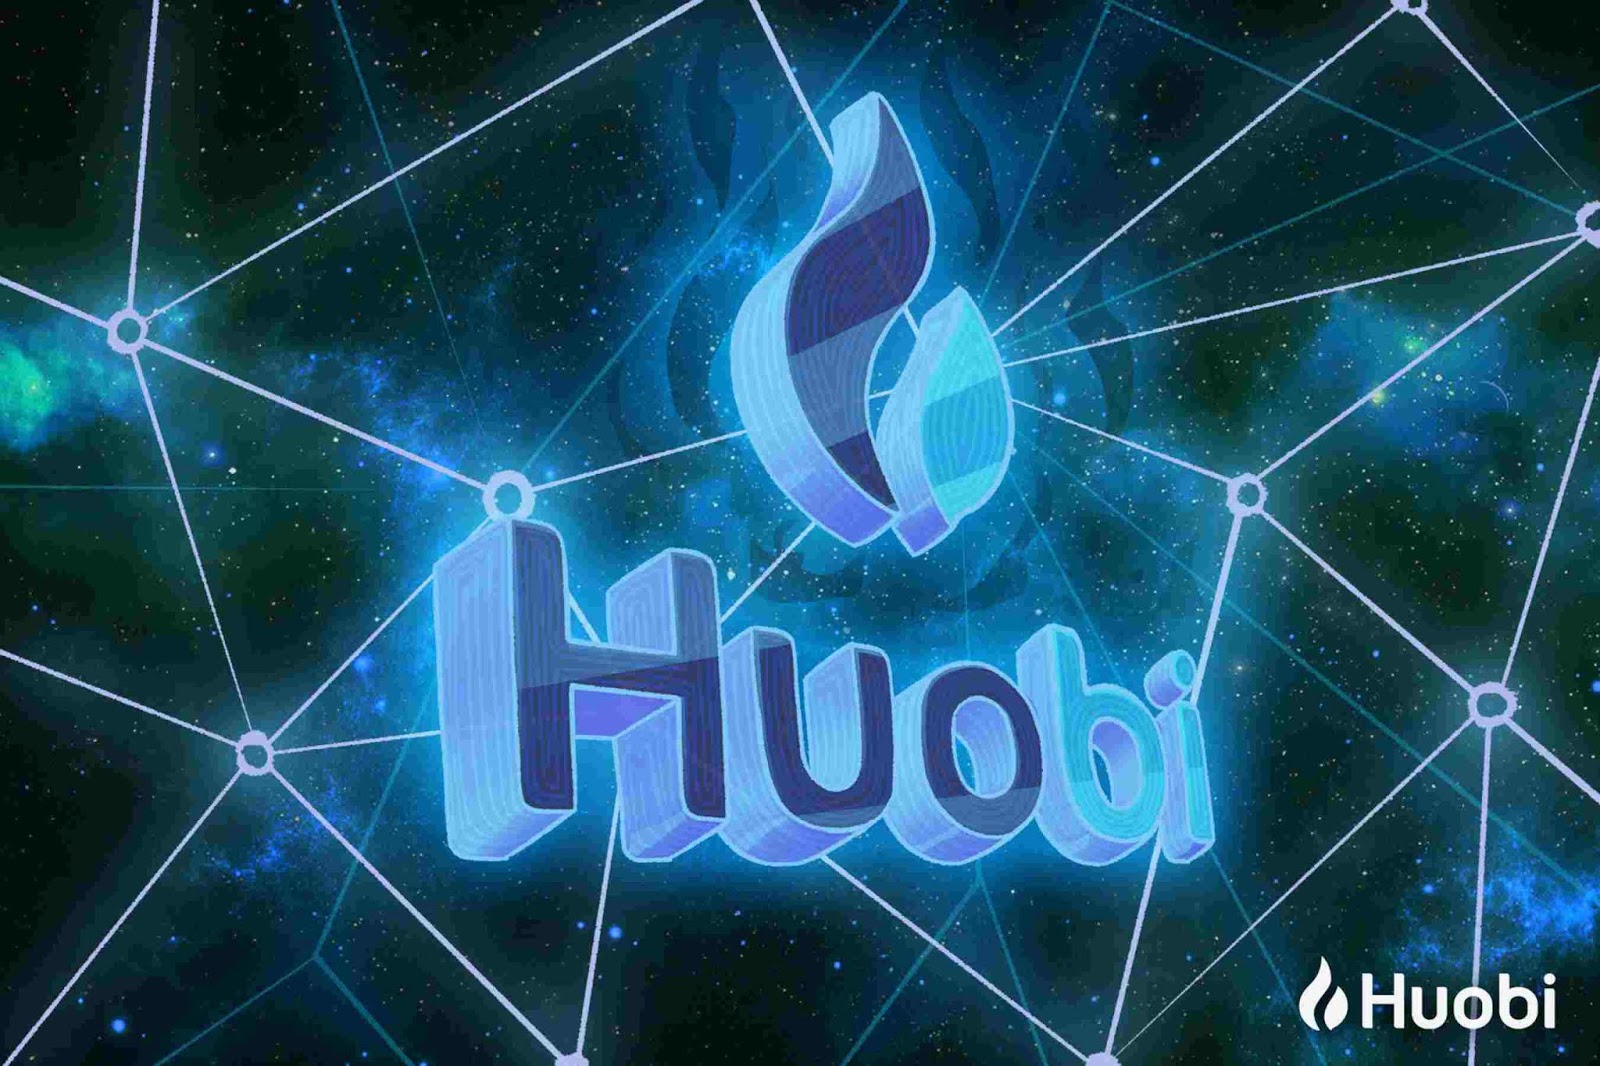 Huobi Public Chain White Paper is now Available